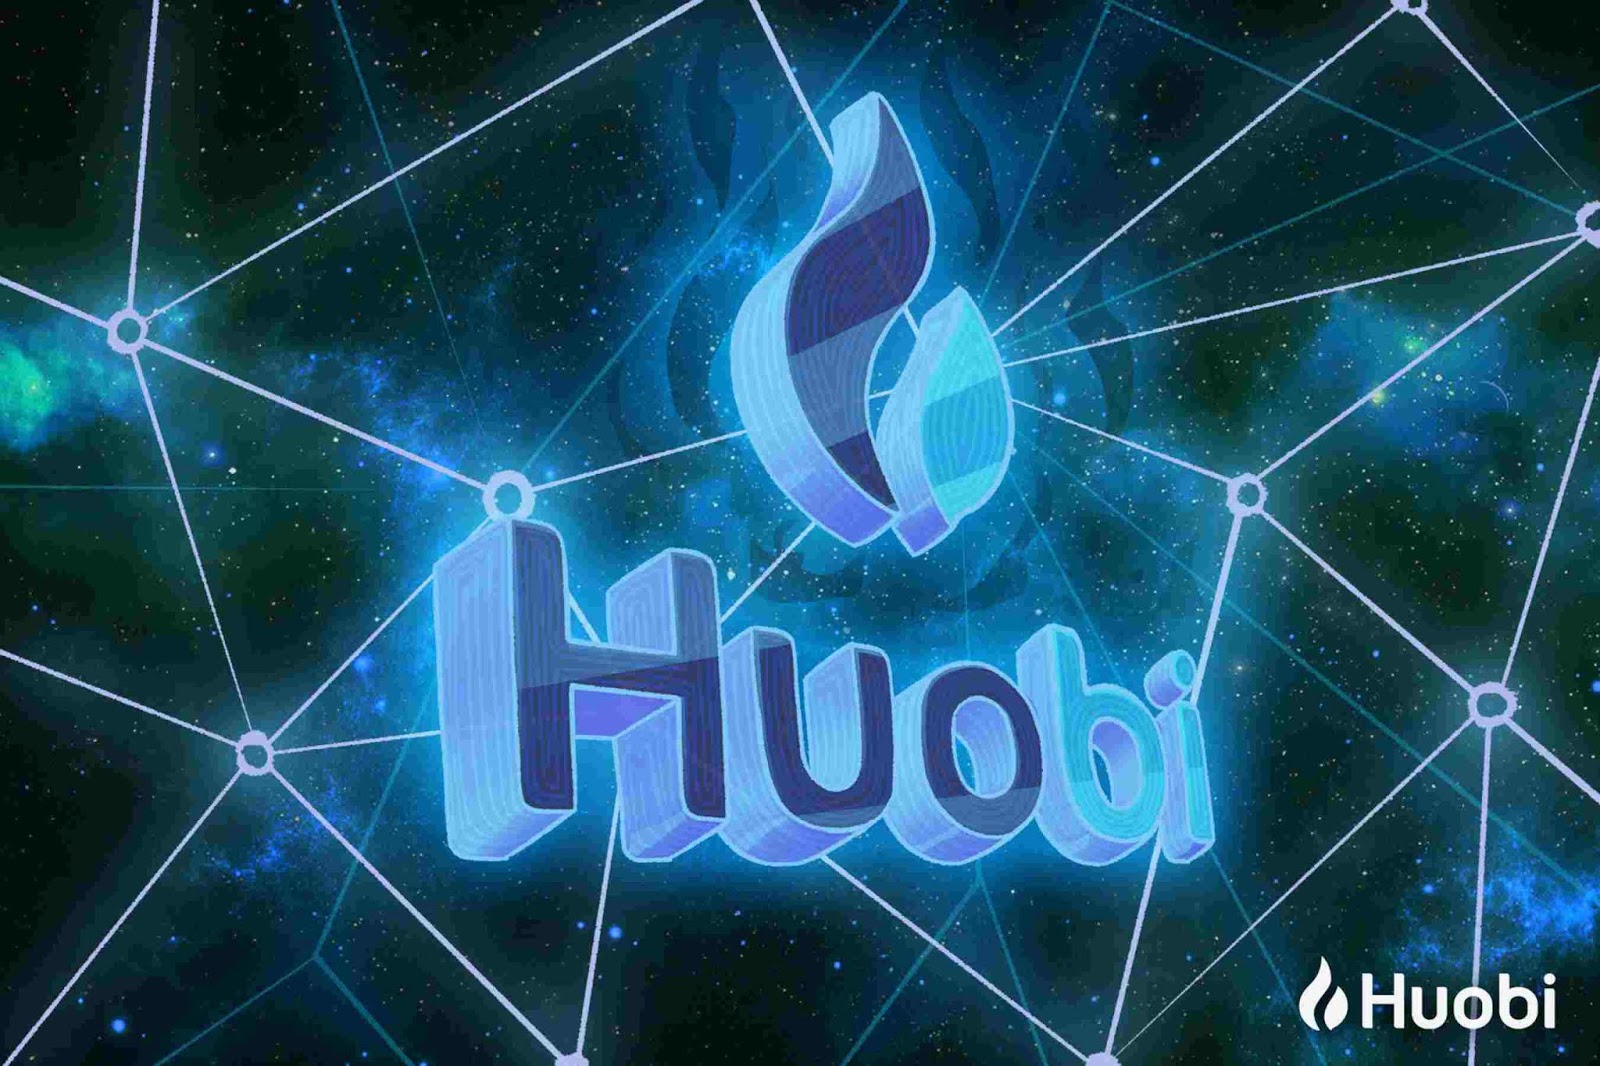 Huobi Public Chain White Paper is now Available